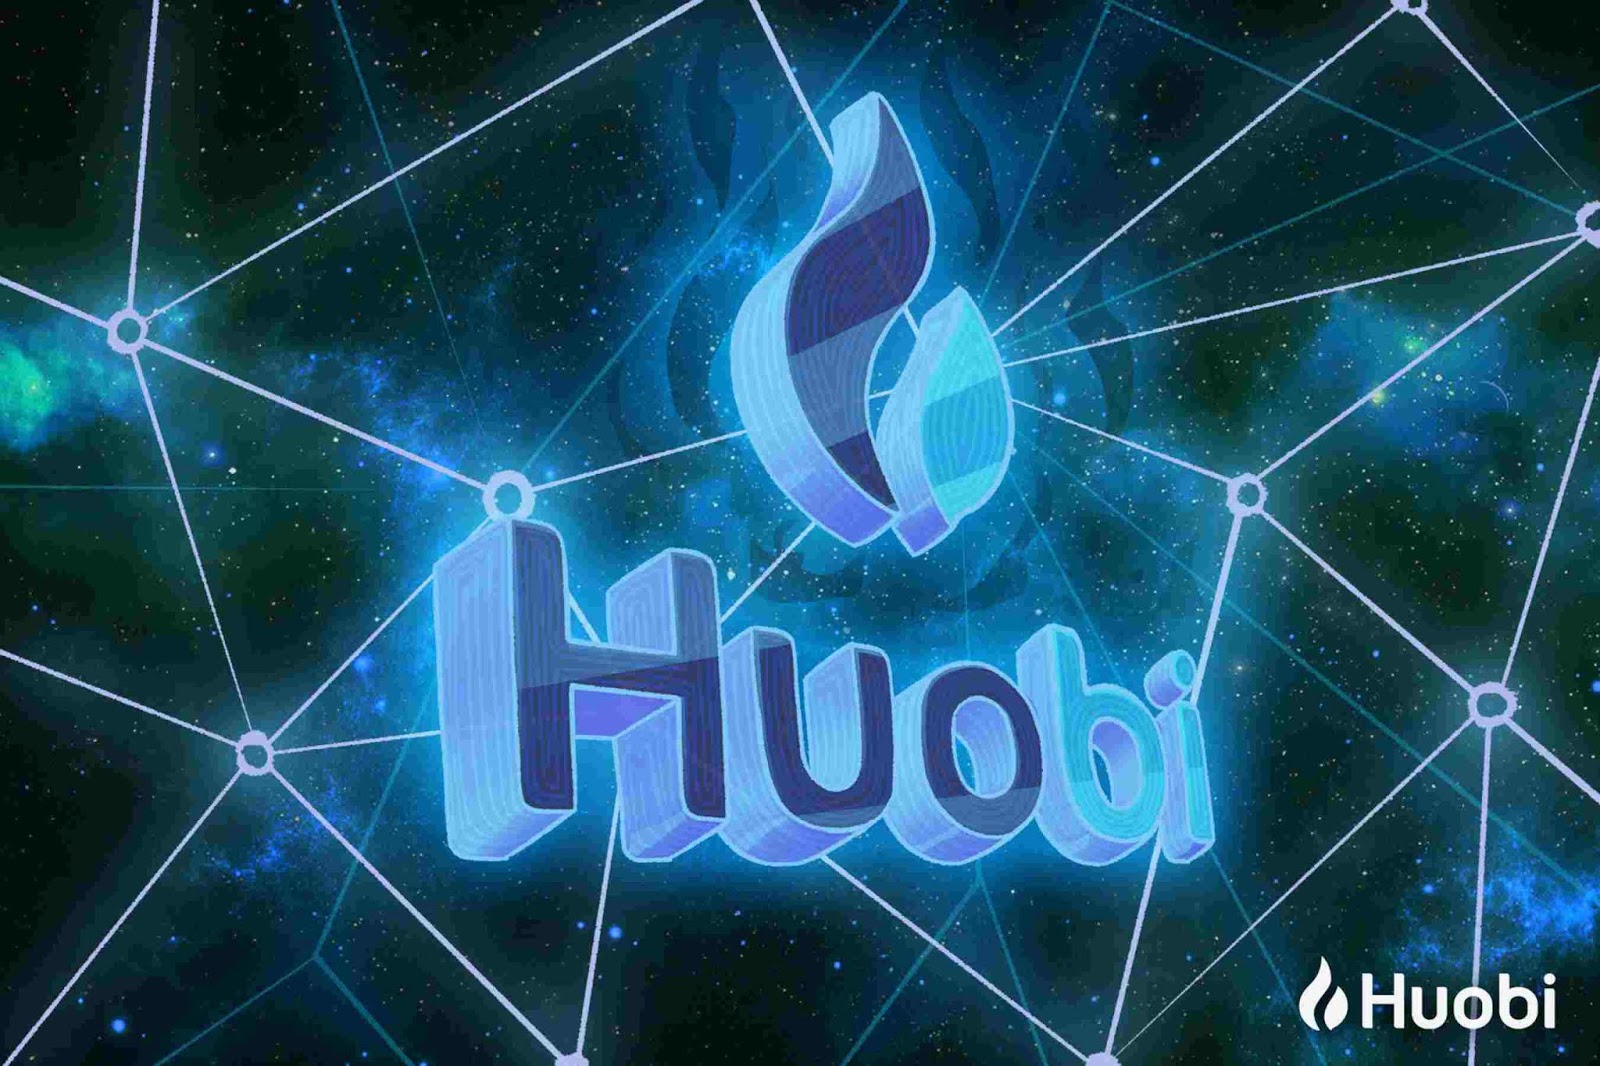 Huobi Public Chain White Paper is now Available